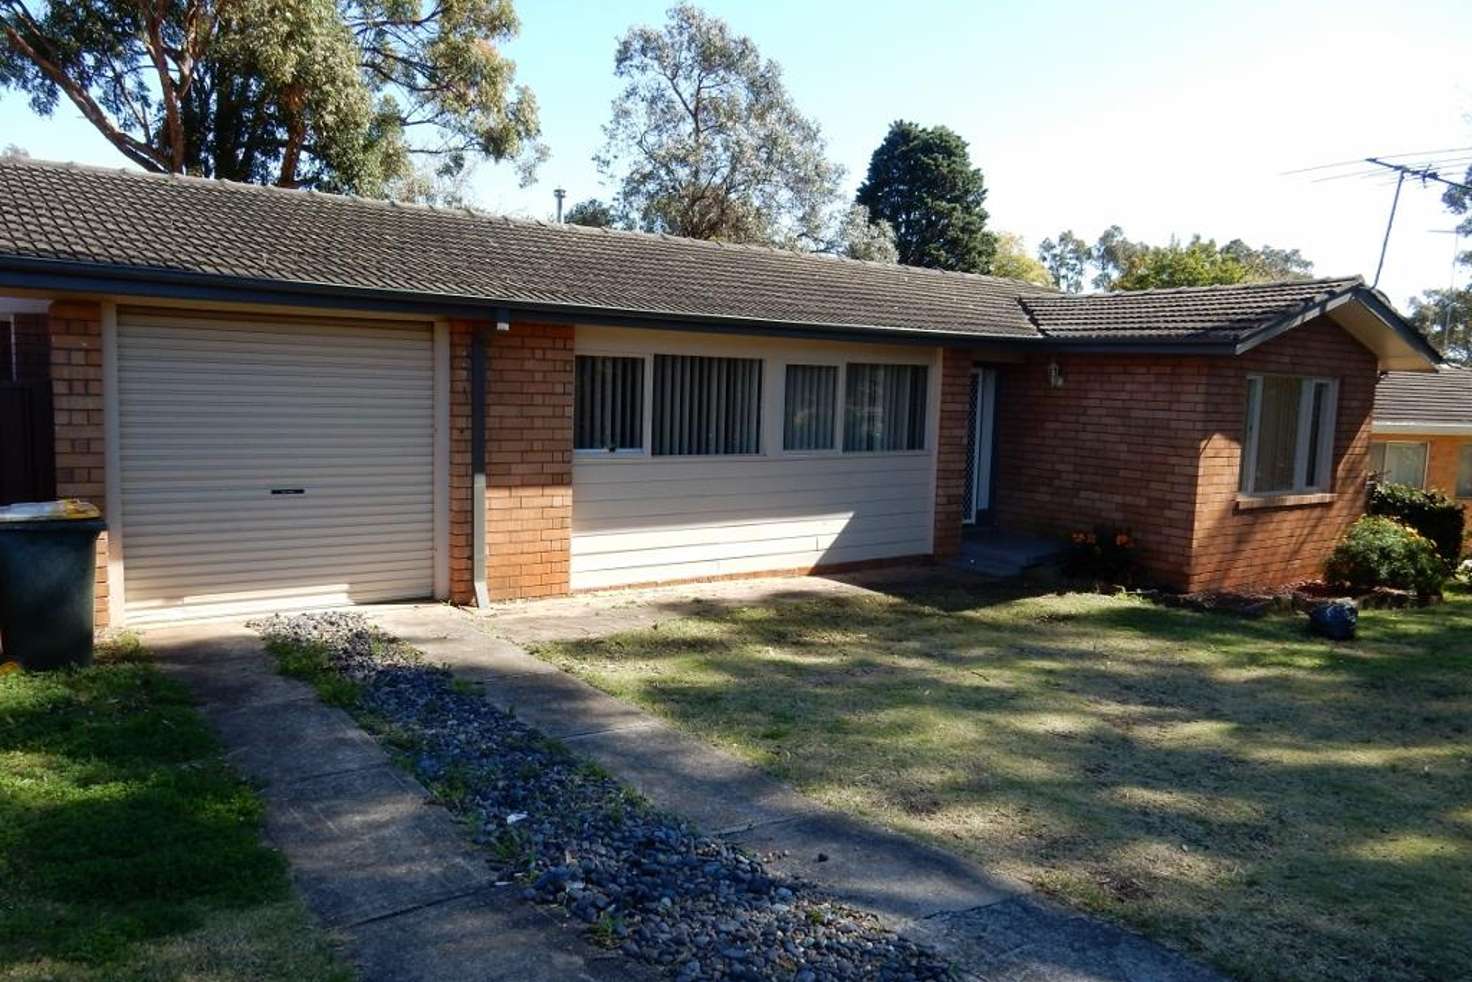 Main view of Homely house listing, 101 Campbellfield Avenue, Bradbury NSW 2560